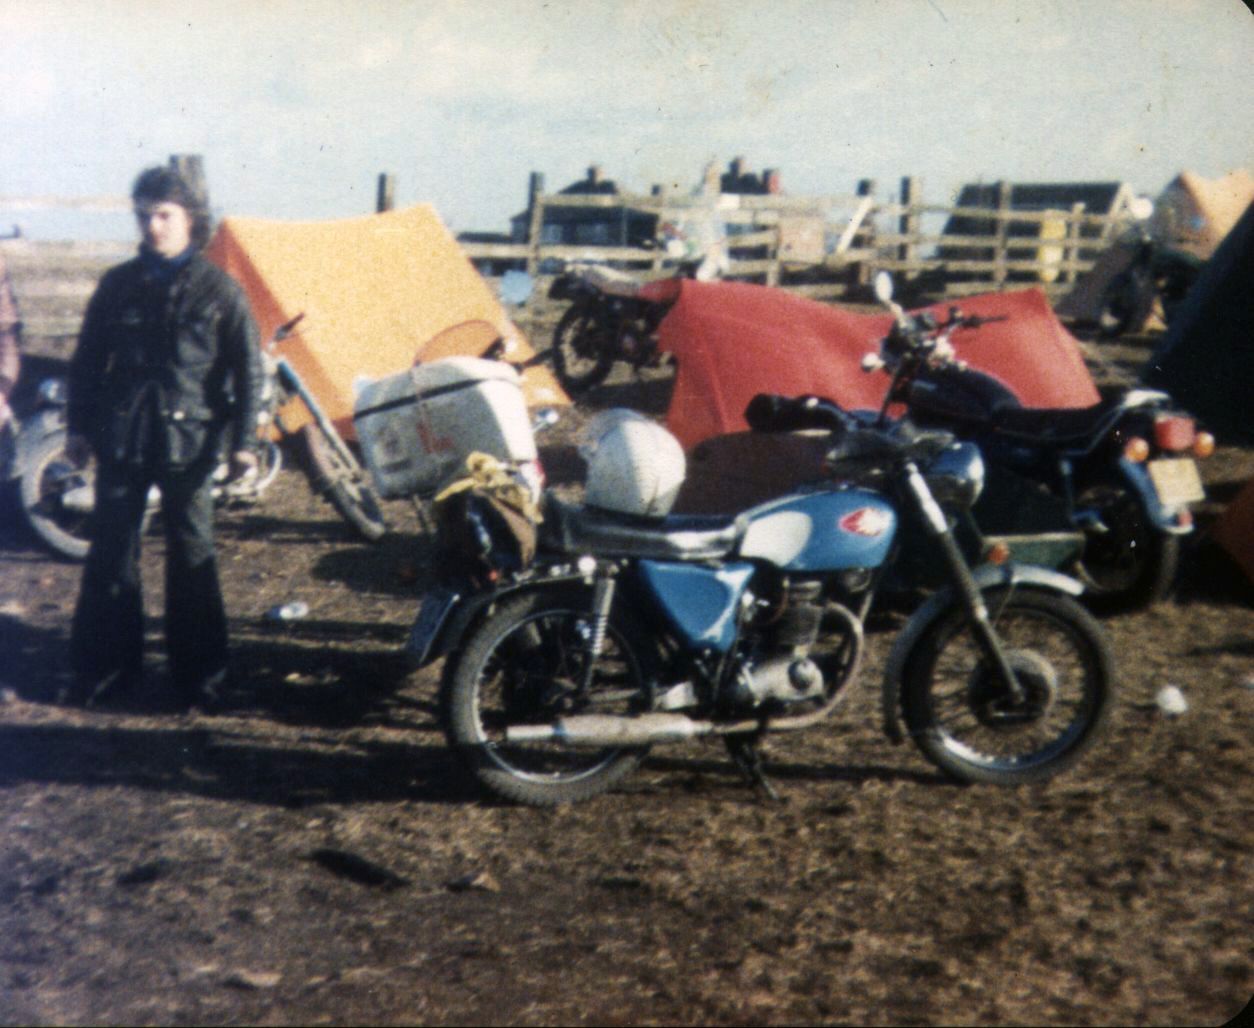 Cracking old BSA in this one estimated 1979